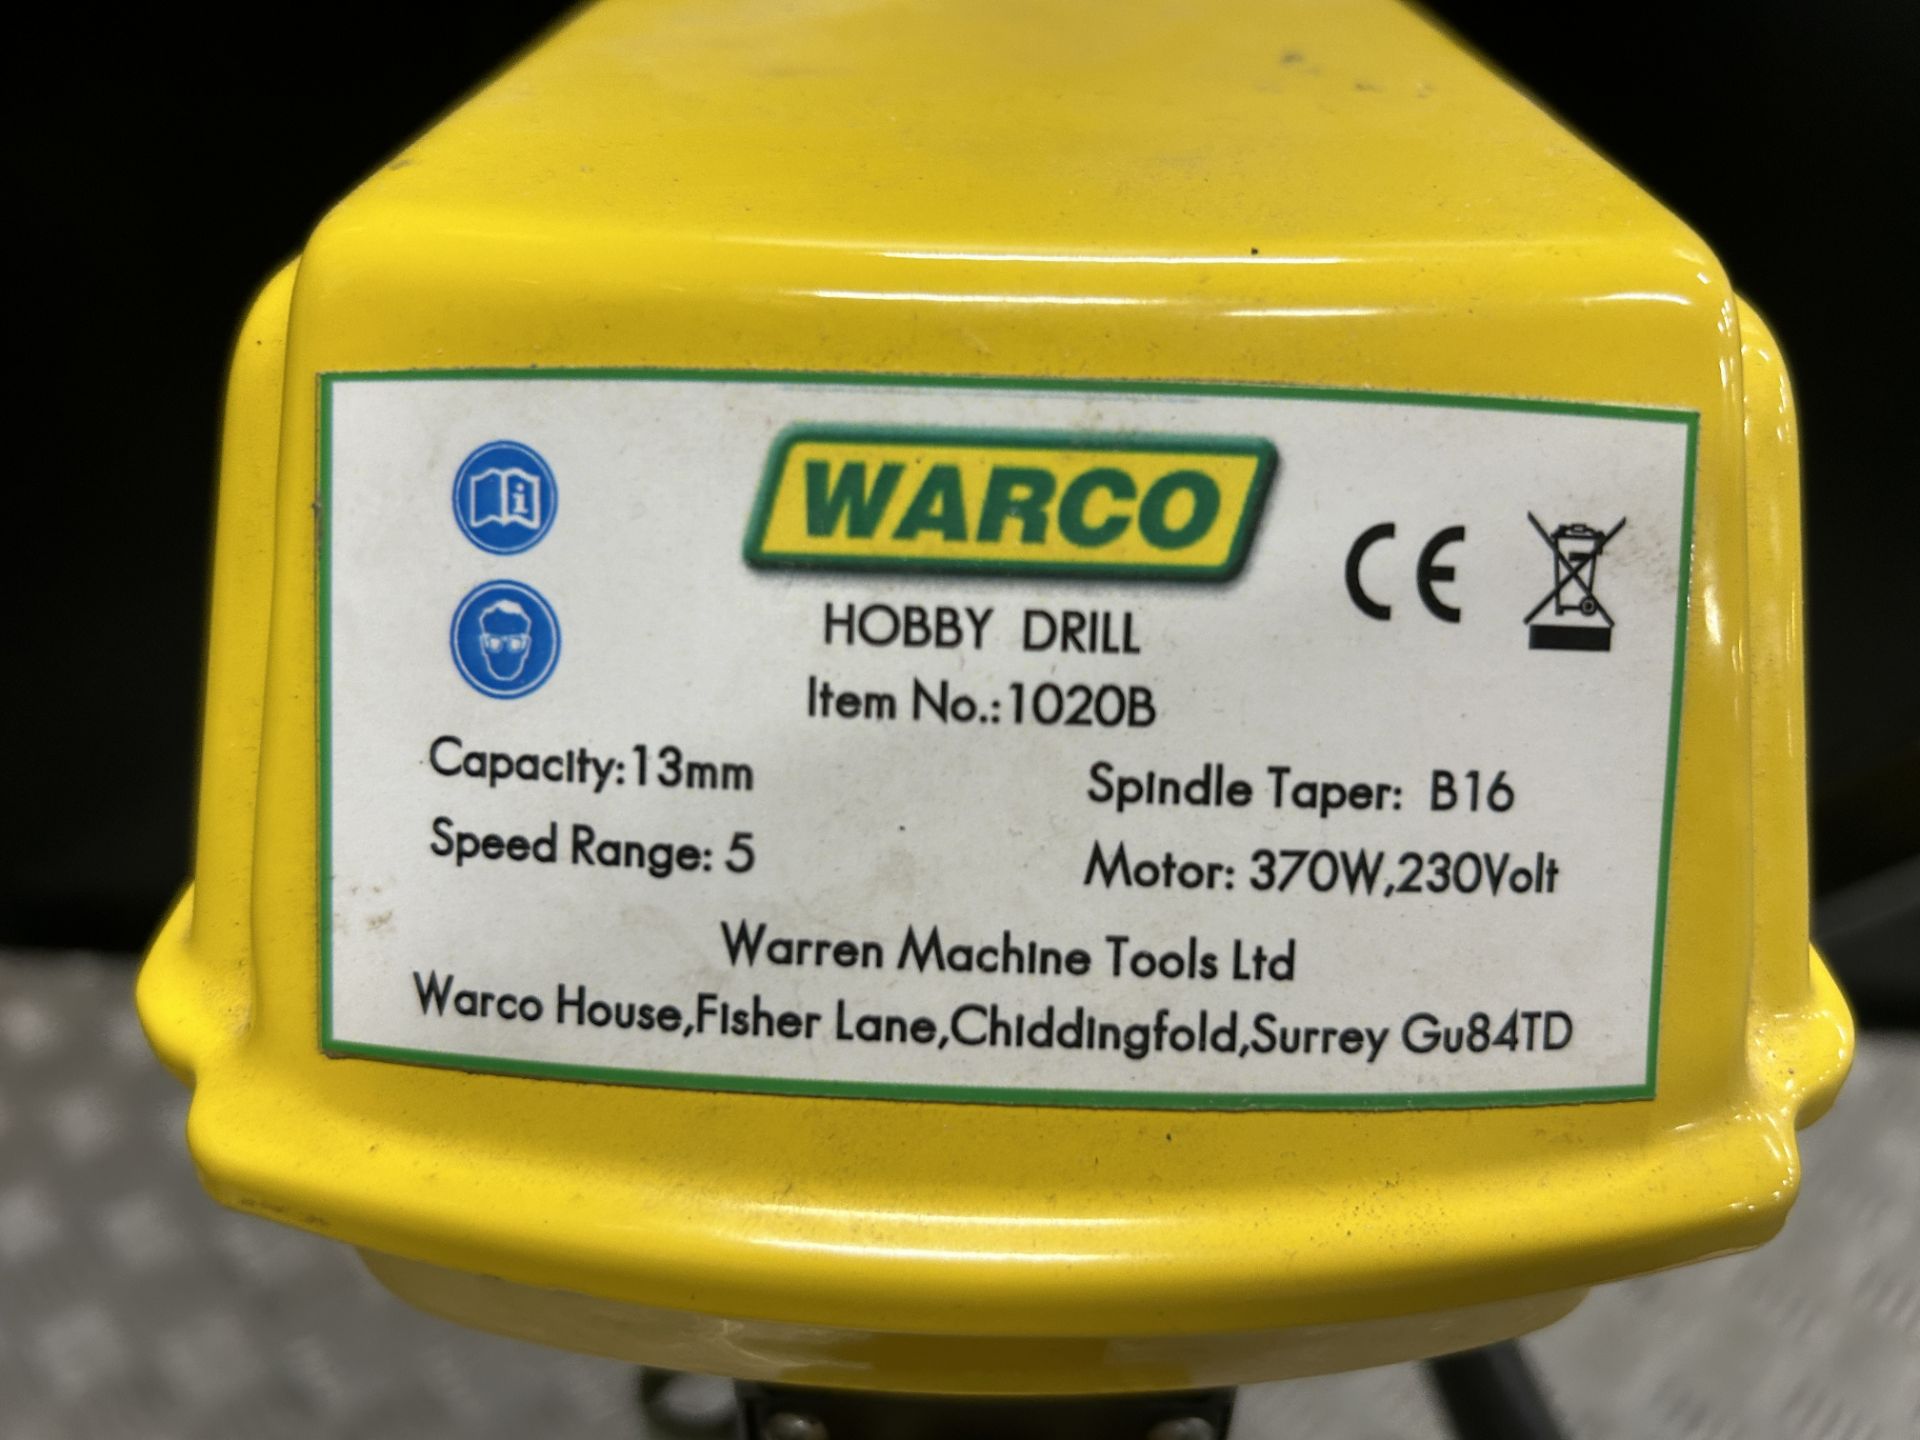 Warco 1020B hobby drill - Image 4 of 4